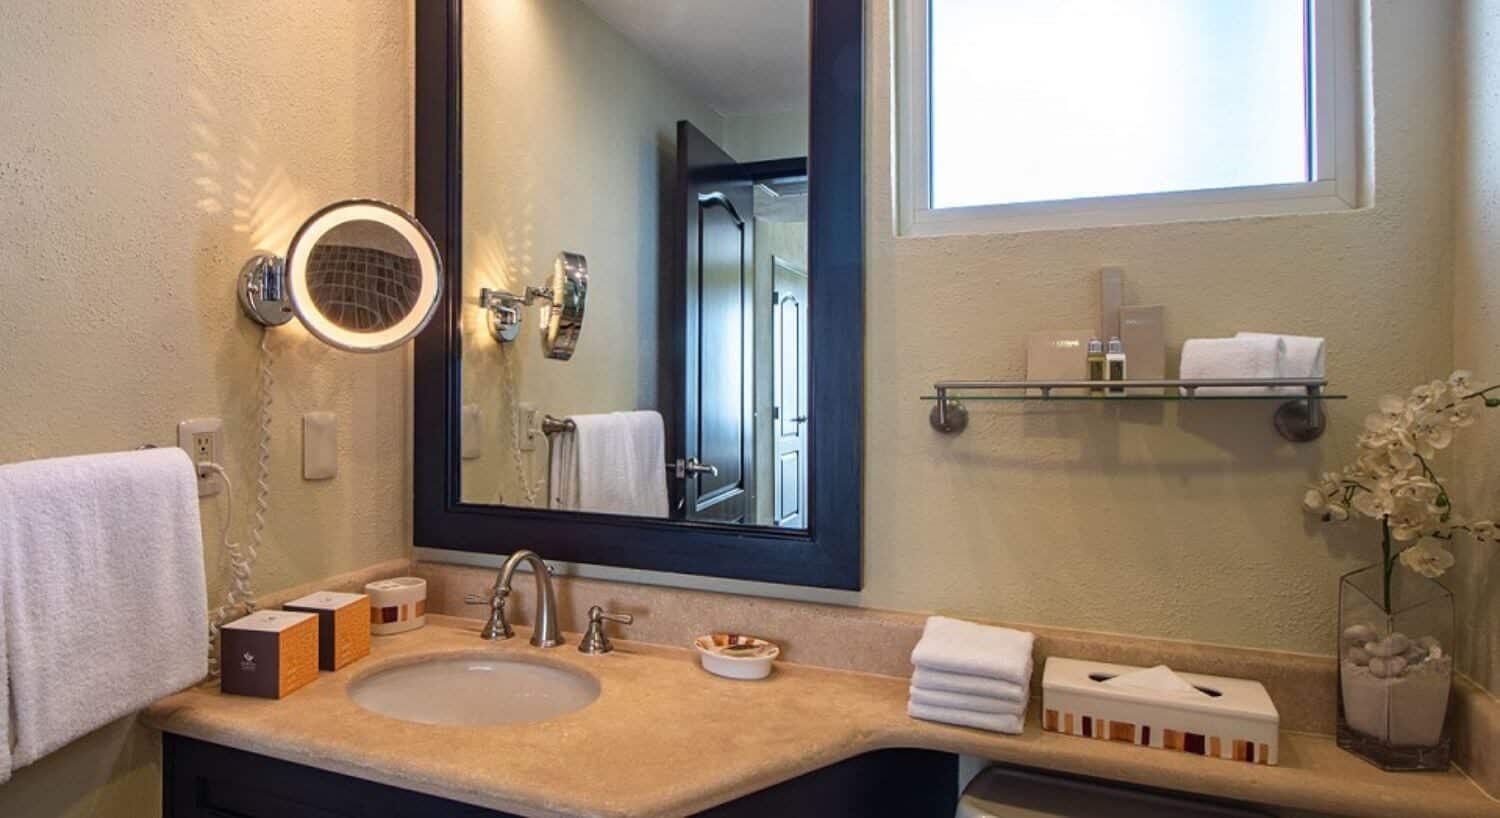 A bathroom with granite countertops, a sink, white towels, mirror, and lit magnifying mirror, with bath amenities and a vase of white flowers in the corner.